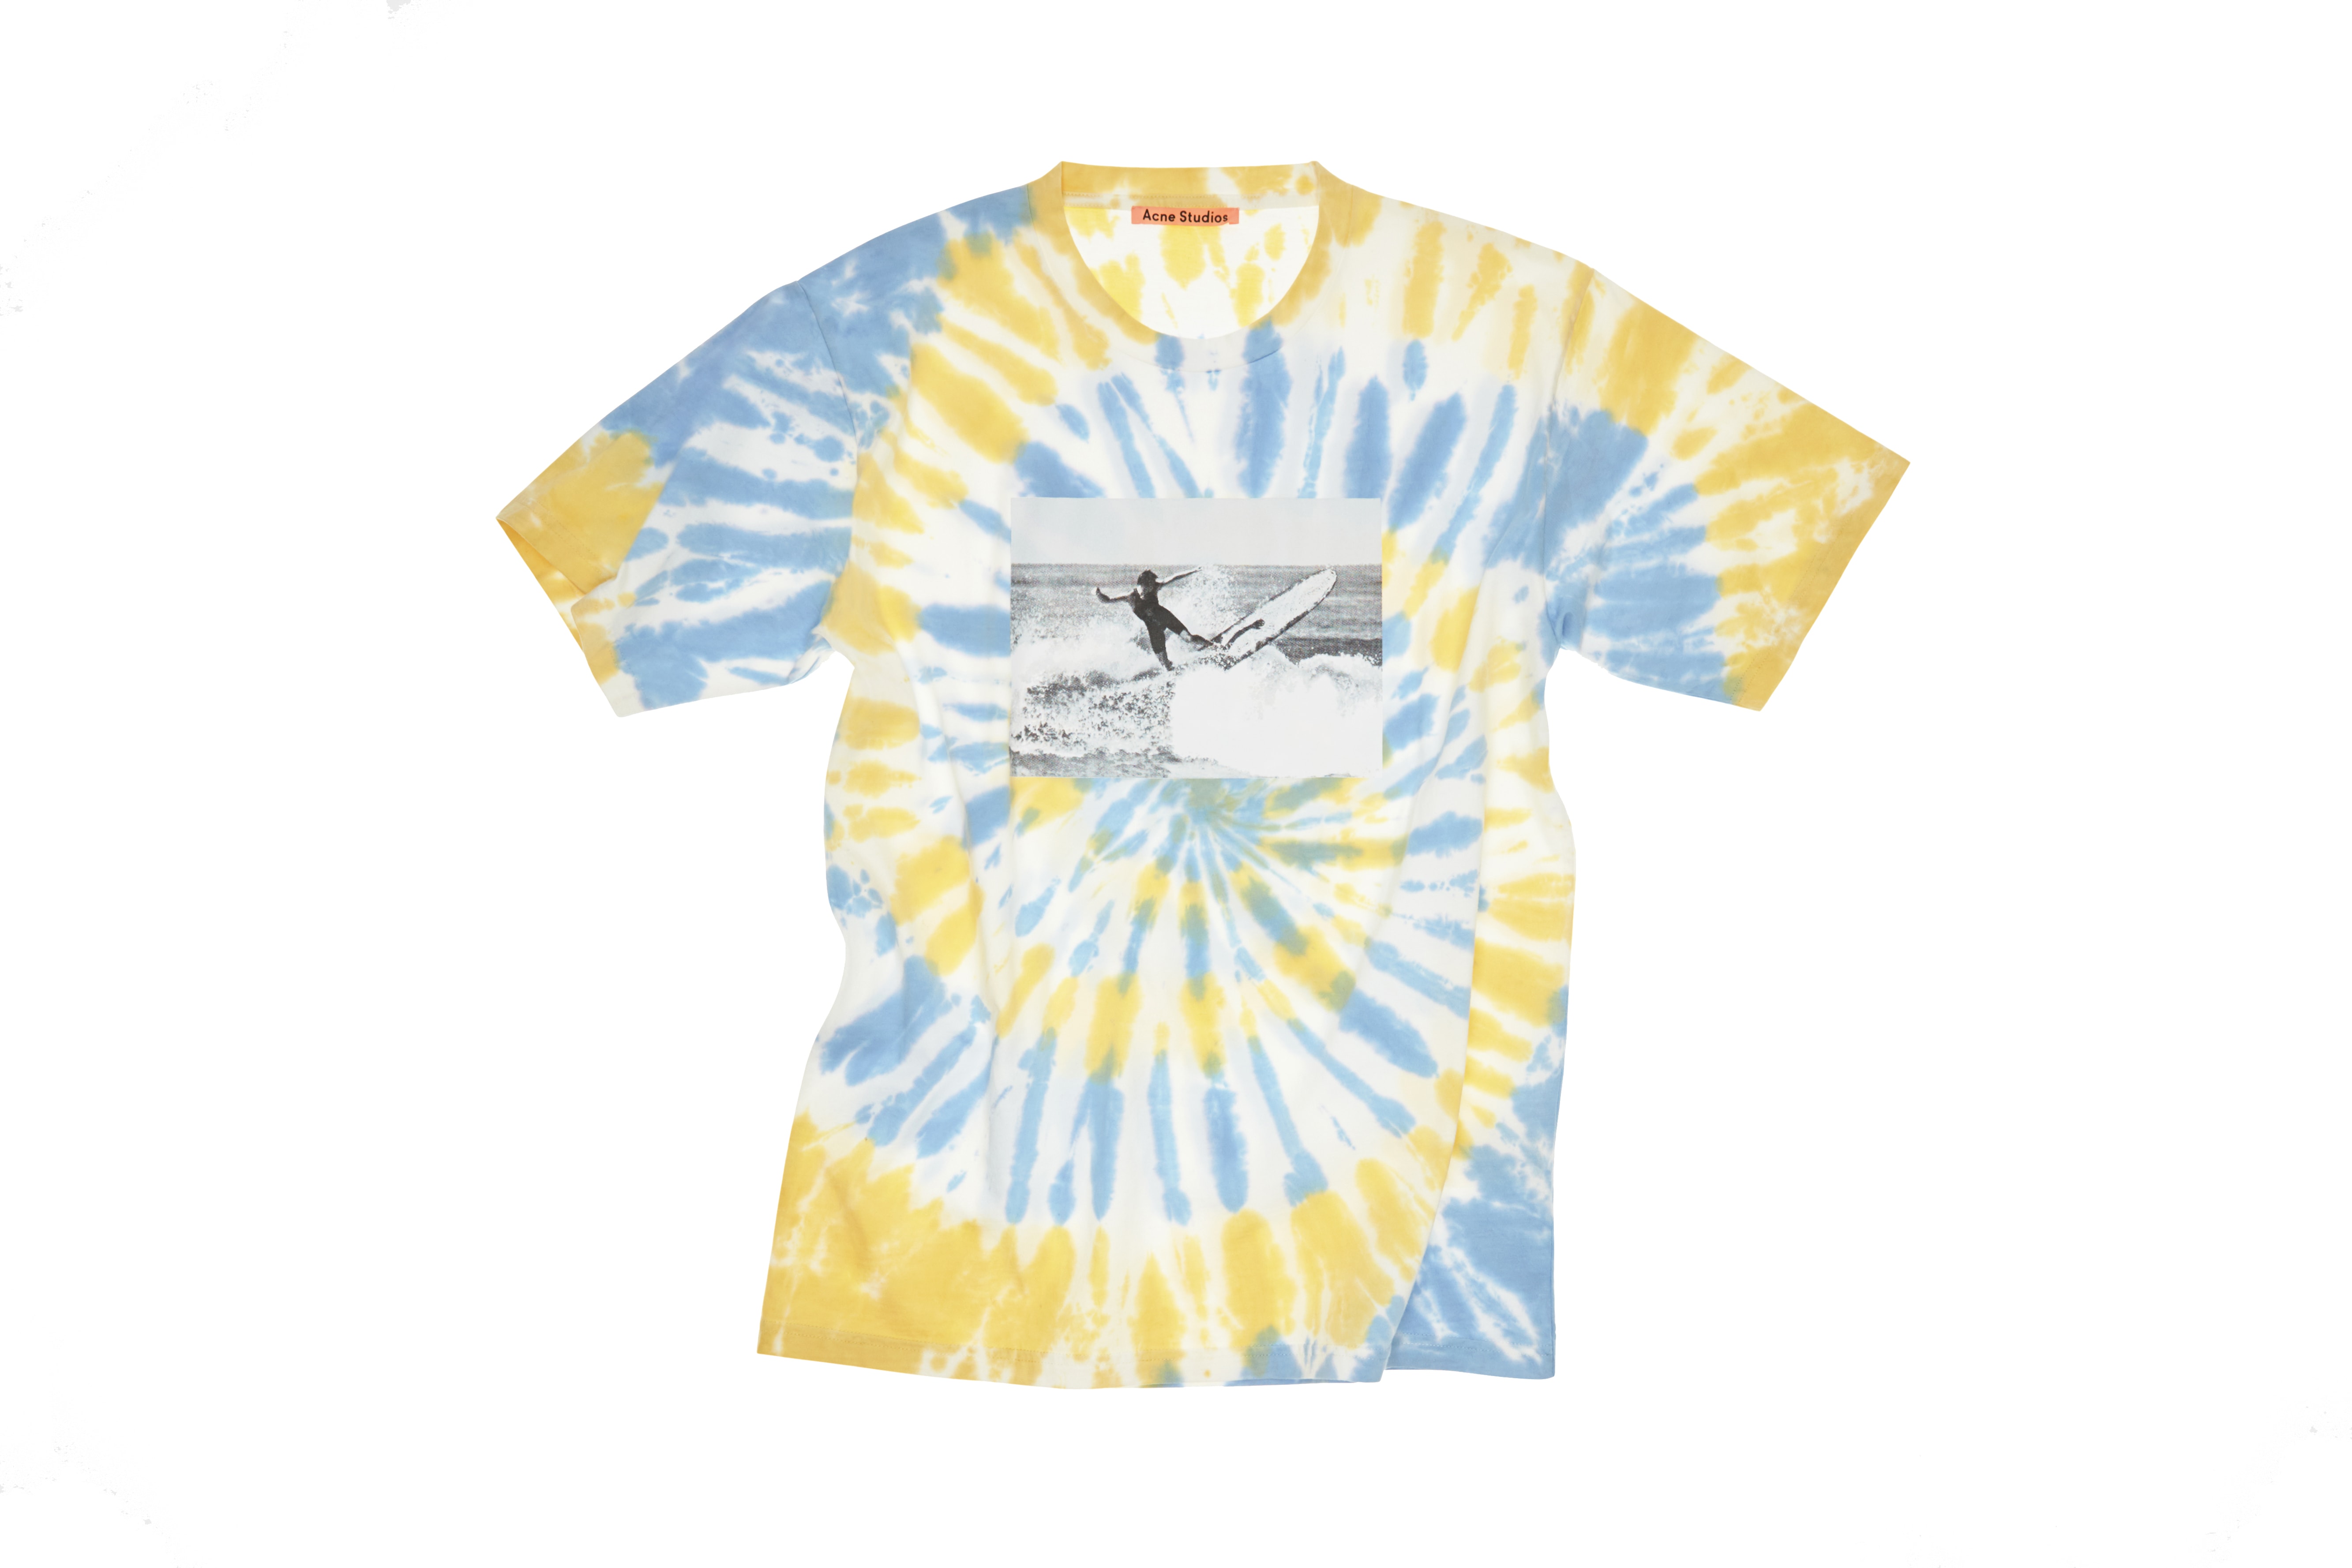 Acne Studios Robin Kegel T-Shirt Capsule Collection Spring Summer 2019 SS19 Surf Inspired Release Drop Date April 18 Online In Store Special Edition psychedelic